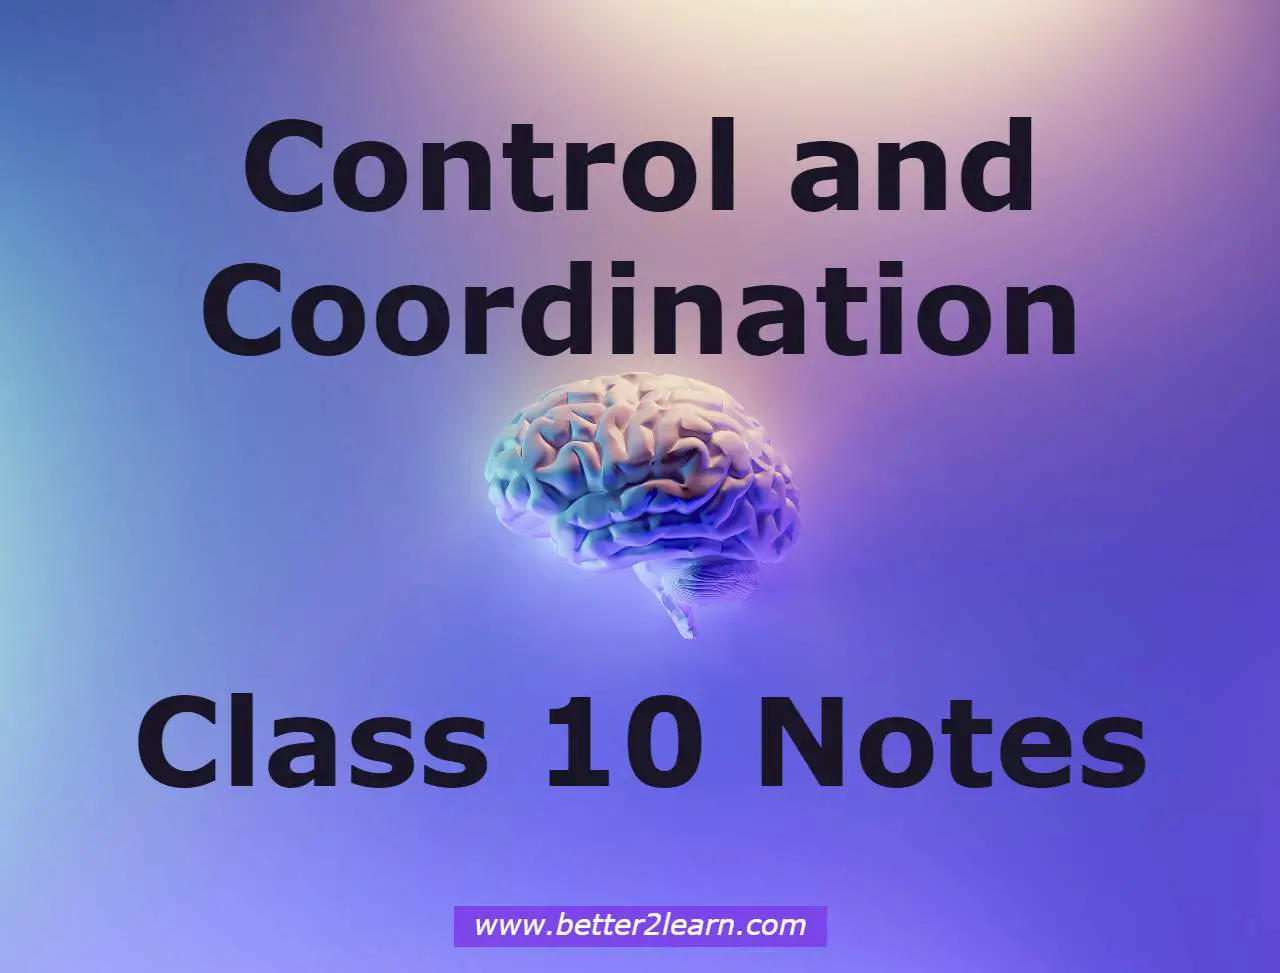 Control and Coordination Class 10 Notes